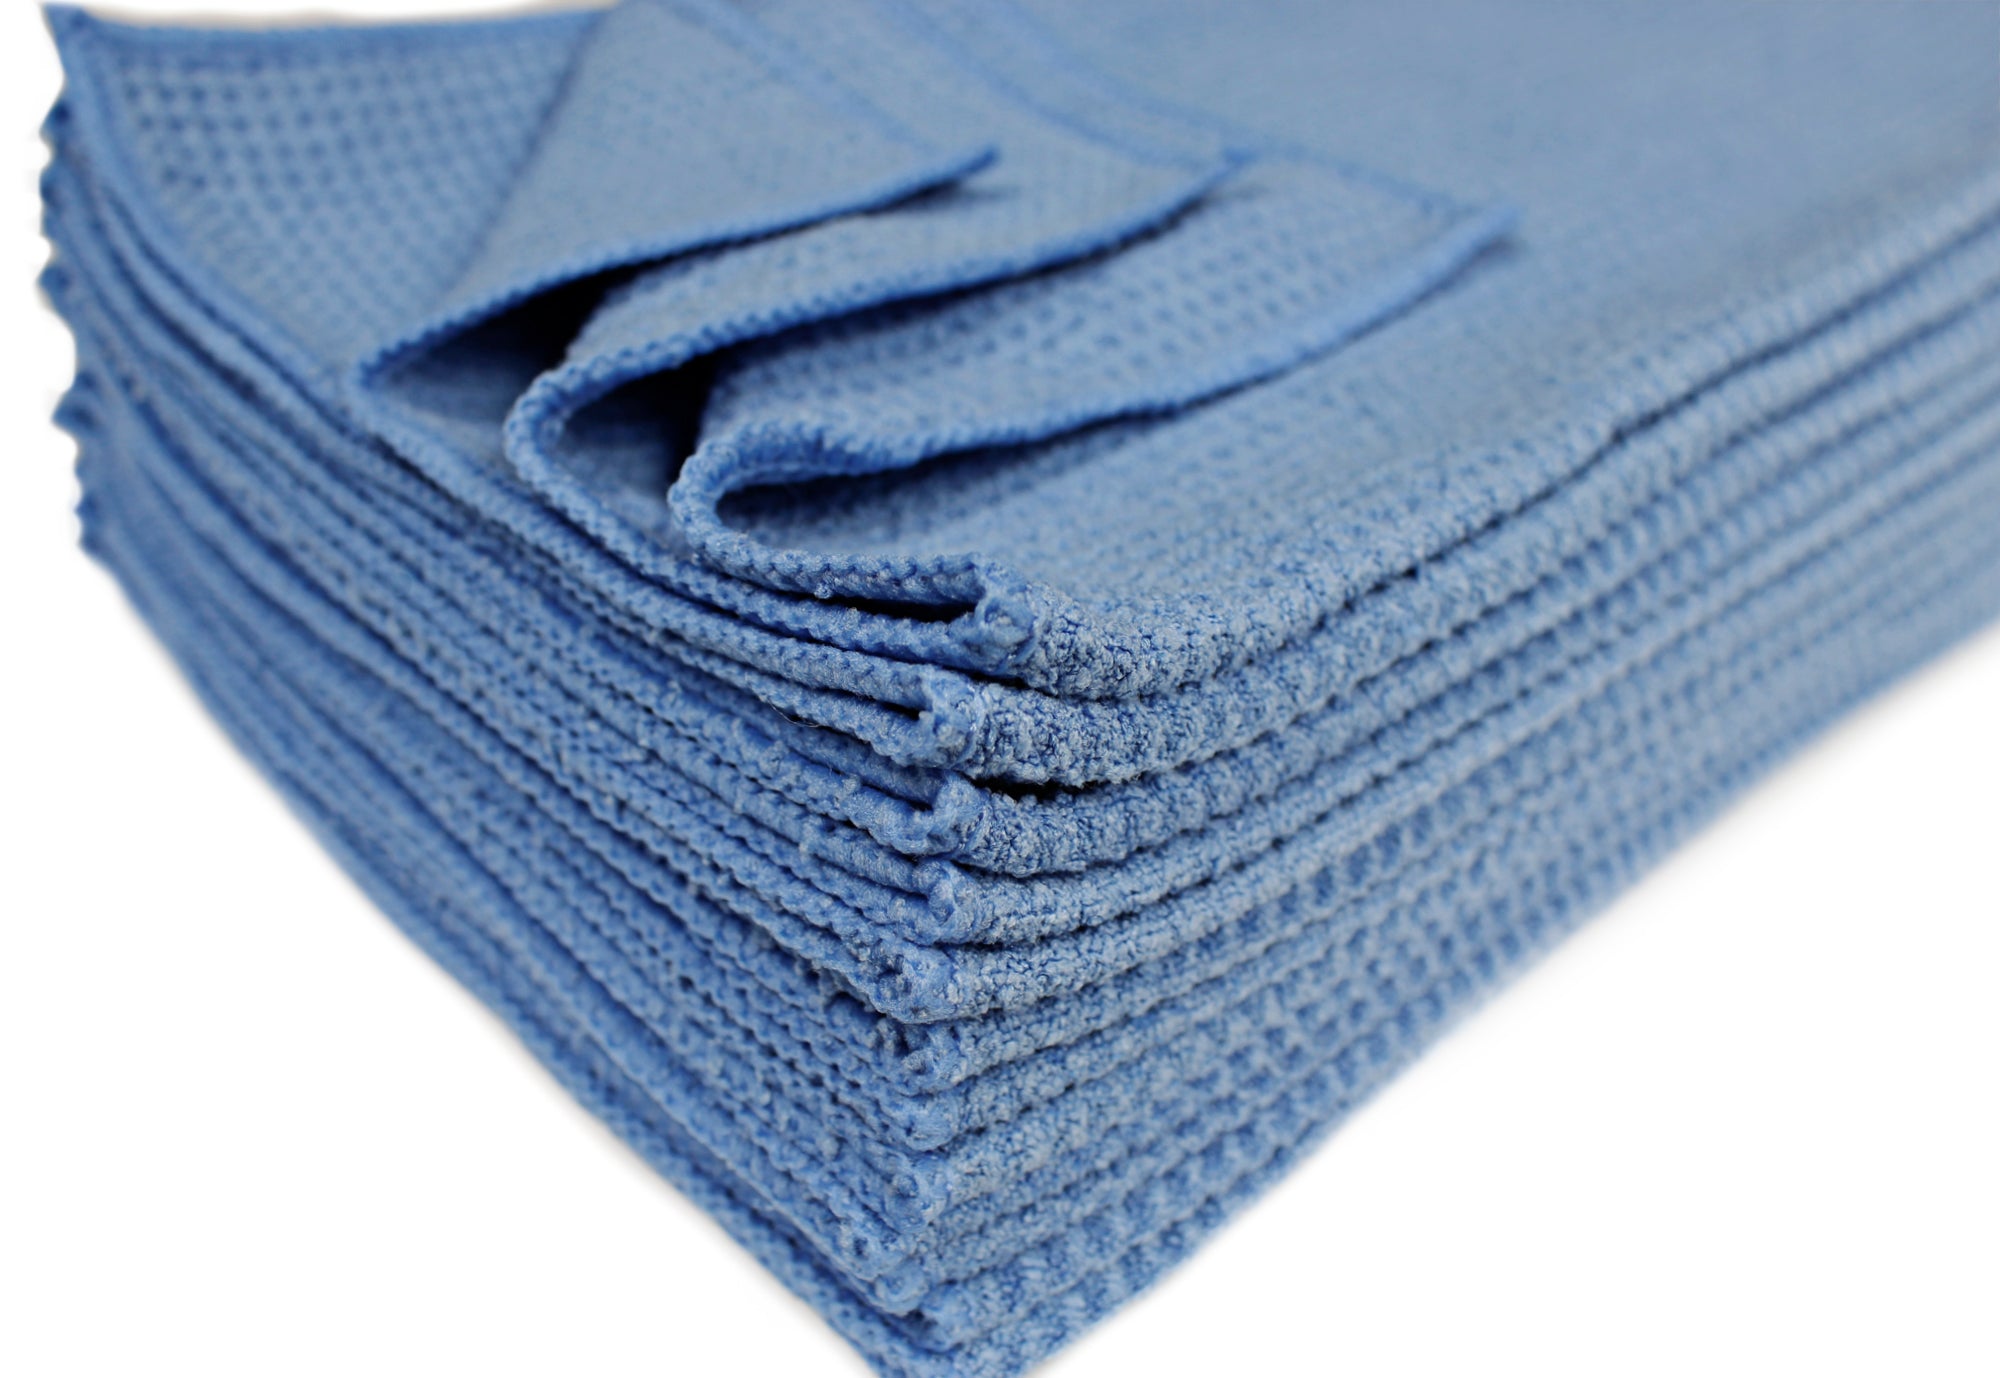 Nouvelle Legende Microfiber Waffle Weave Cleaning Towel, 16 x 16 Inches, Blue, 12 Pack